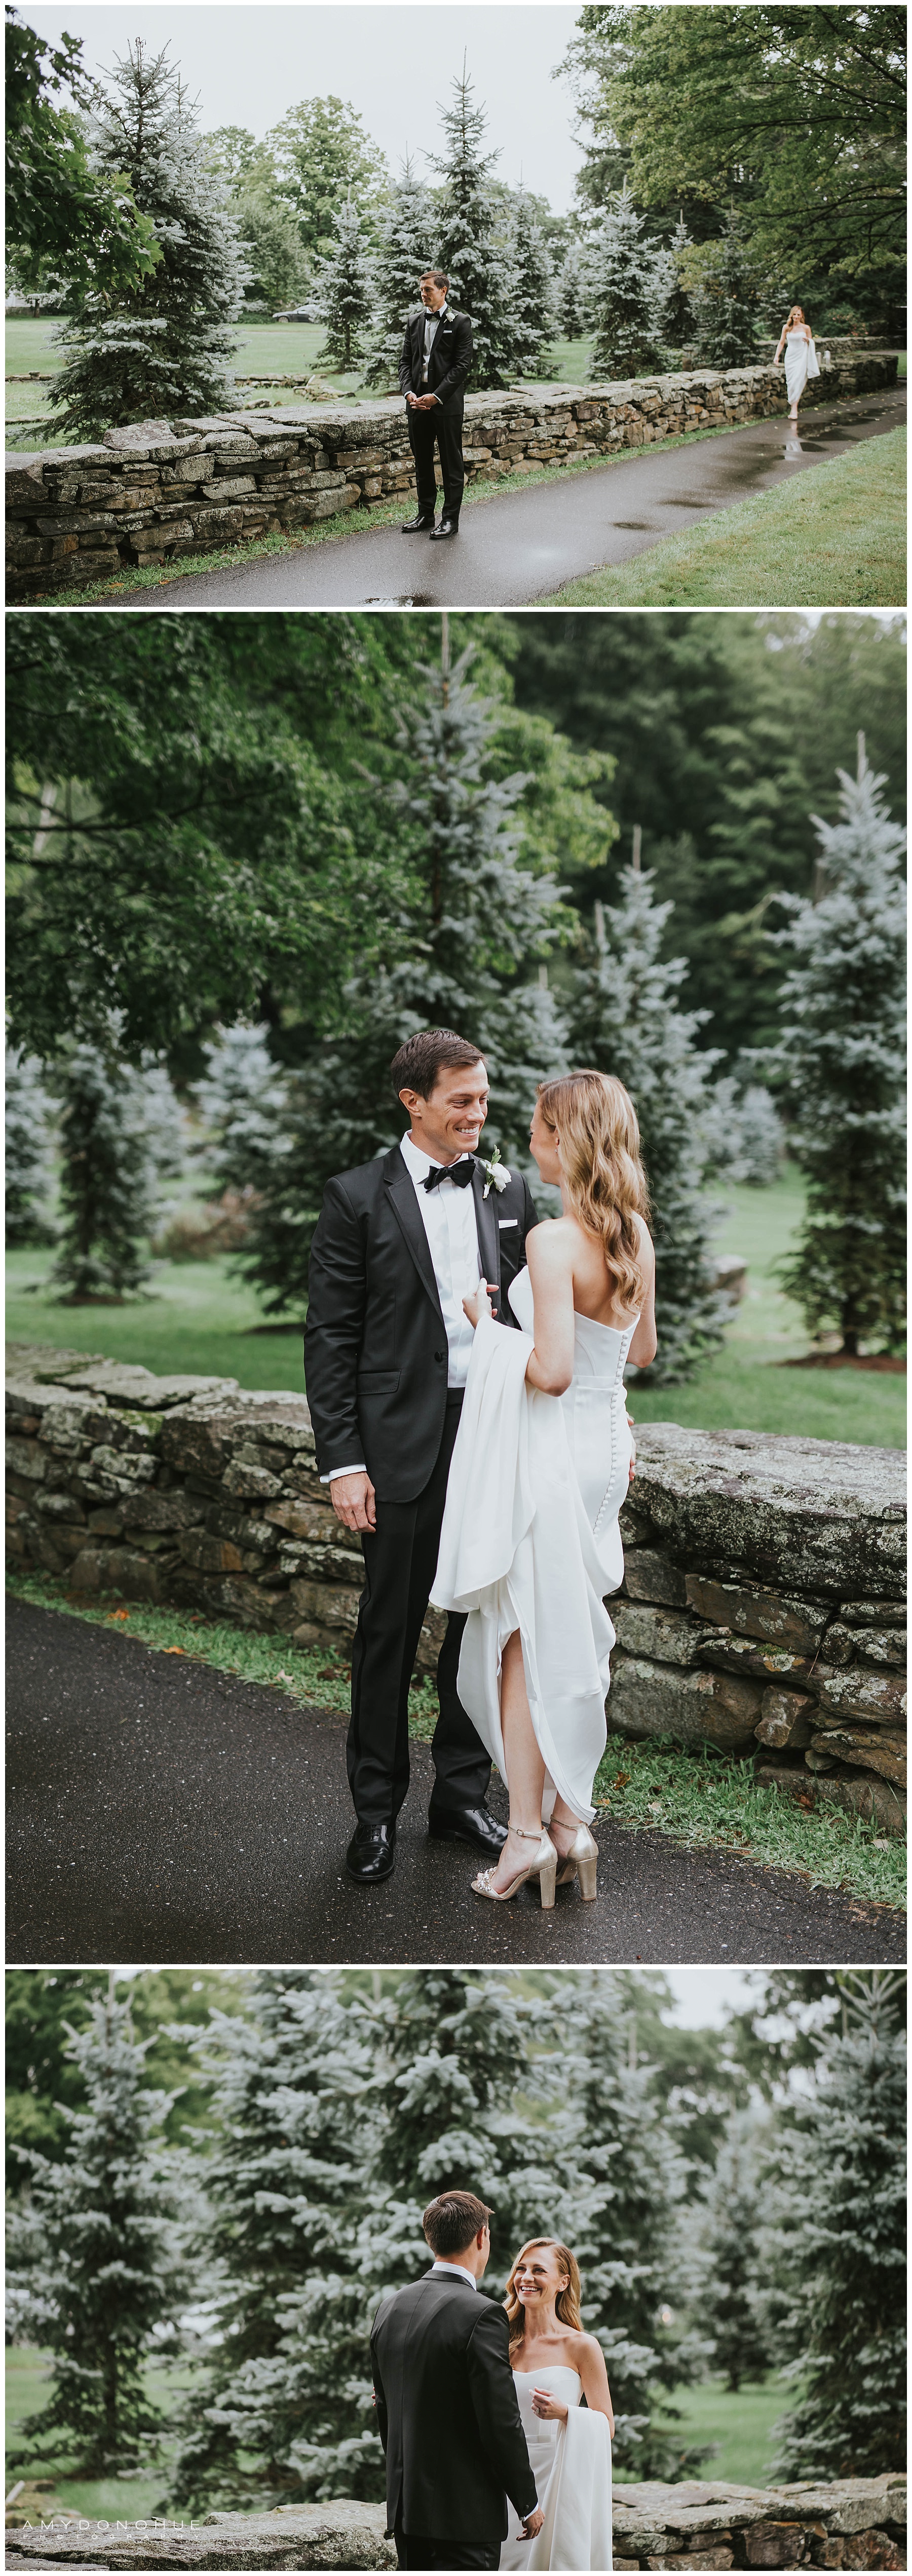 Bride and Groom First Look | © Amy Donohue Photography | Woodstock, Vermont Wedding Photographer